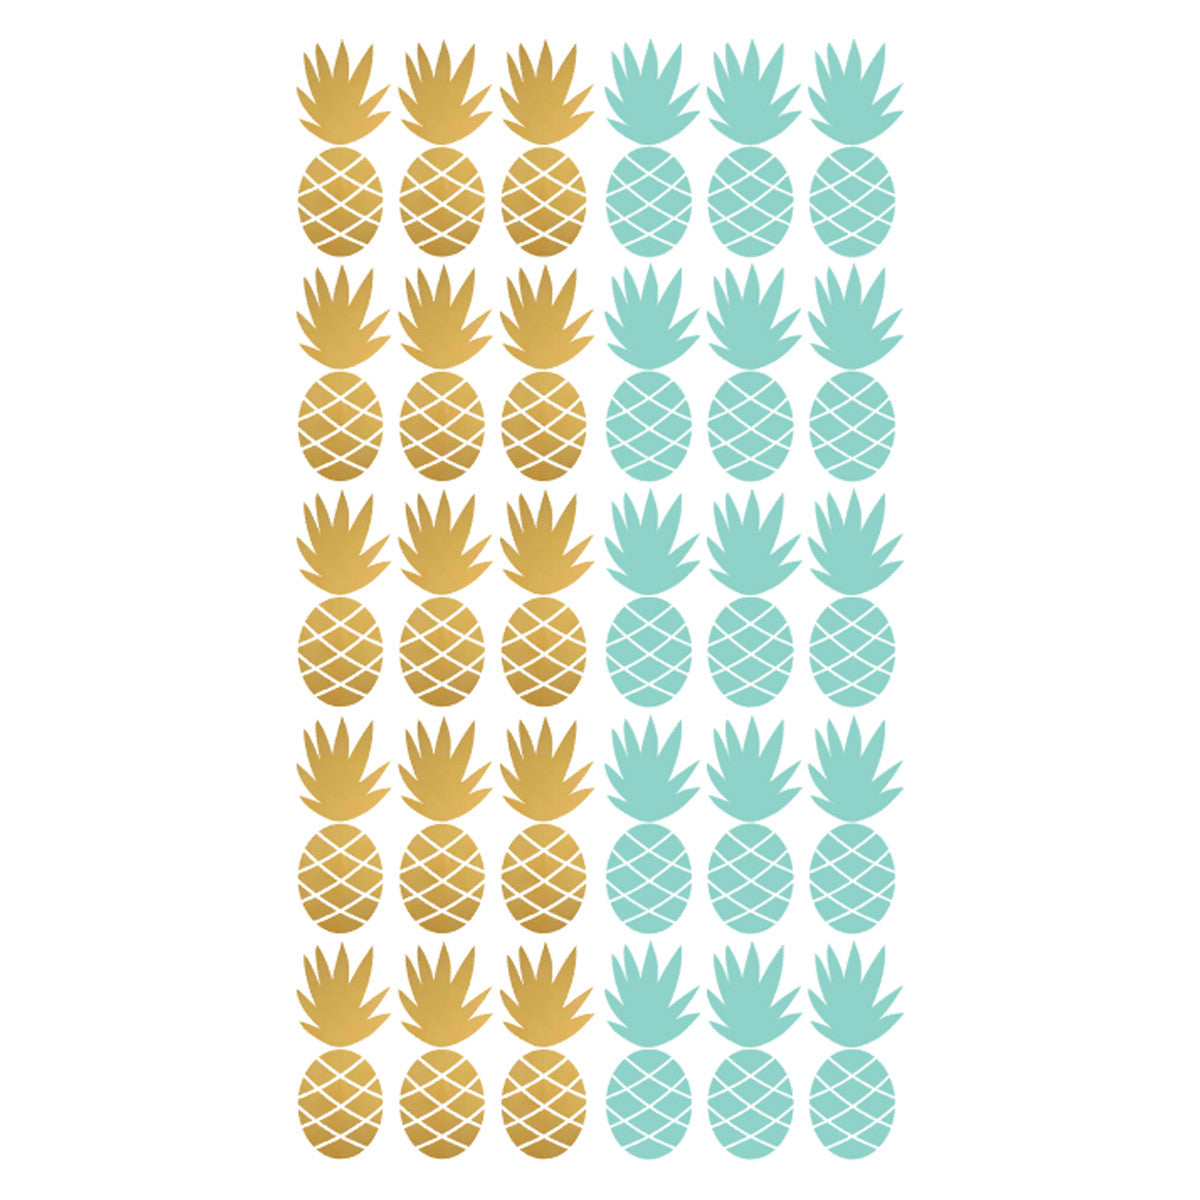 deer industries kids lifestyle bedroom wall decor wall decals pom pineapple gold mint